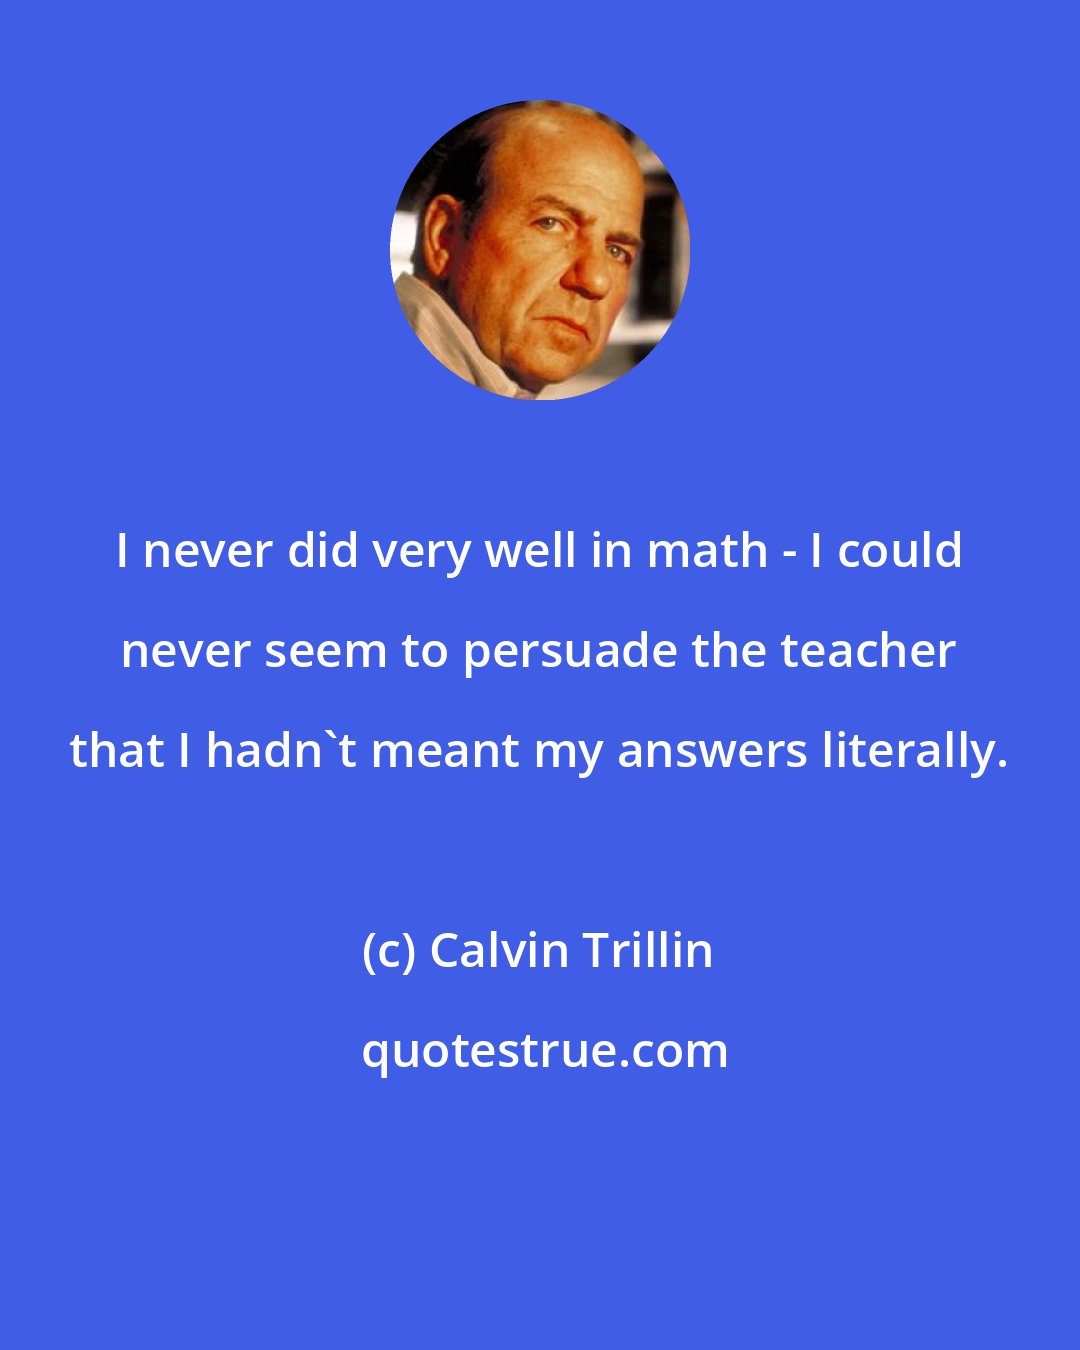 Calvin Trillin: I never did very well in math - I could never seem to persuade the teacher that I hadn't meant my answers literally.